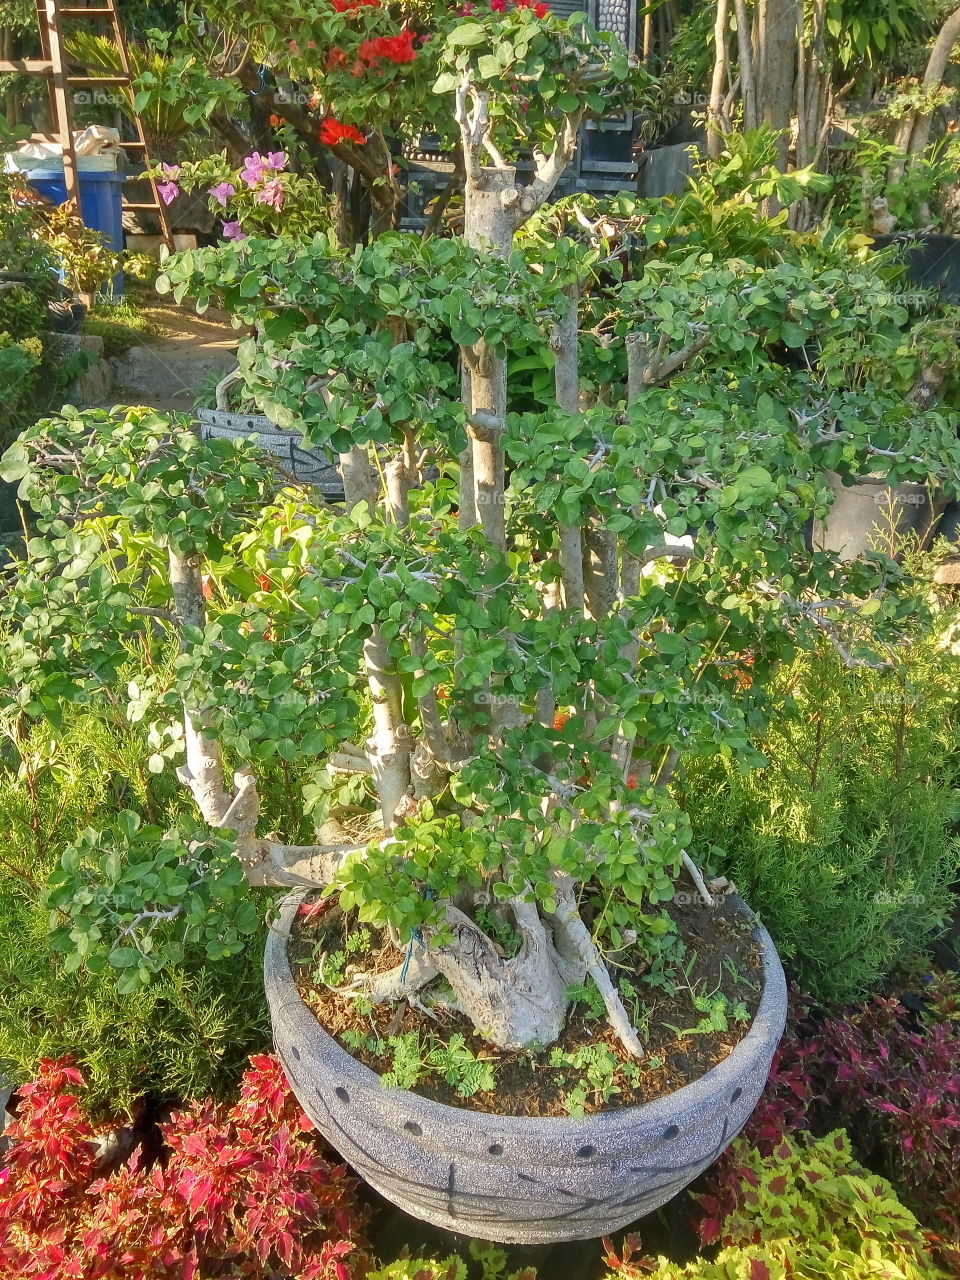 Bonsai USD 500.
the art of maintaining dwarf plants by prioritizing the beauty of plants.